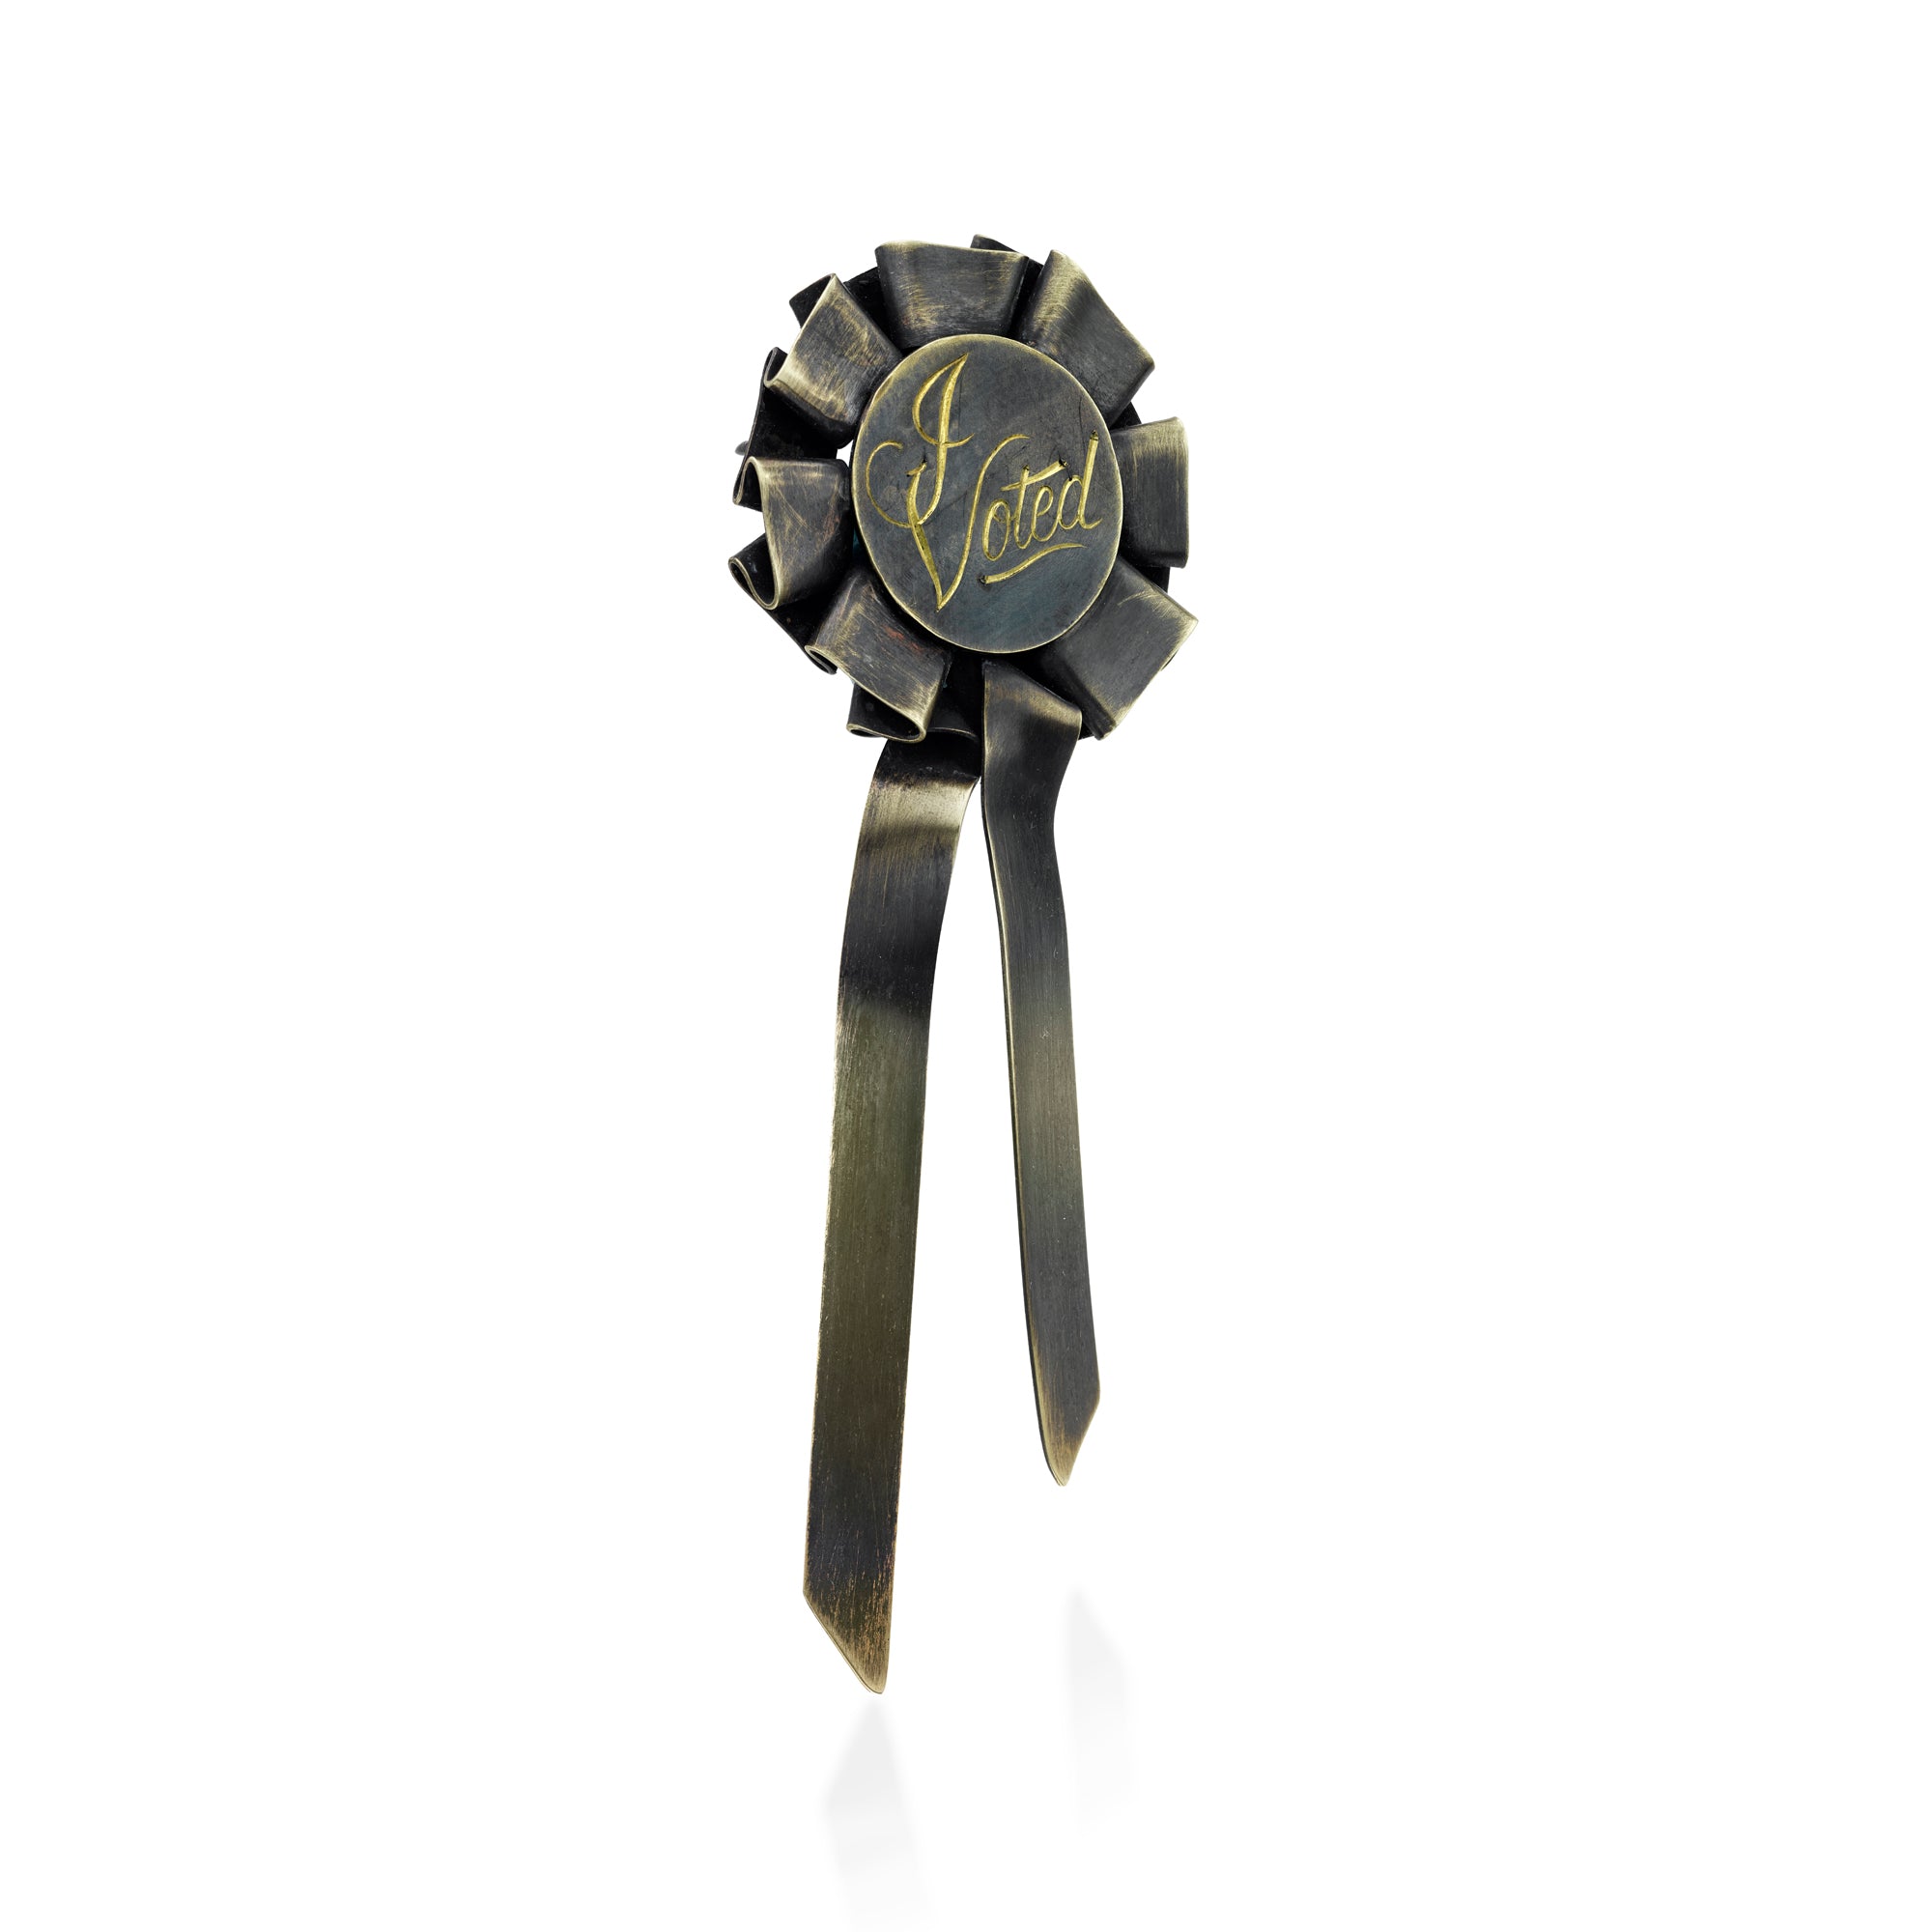 Limited edition of "I Voted" pins created in response to the centennial of the 19th amendment ratification. Made in brass with patina, only an edition of 7 is made. It is 4.5"x1.5"x.25" in size. 